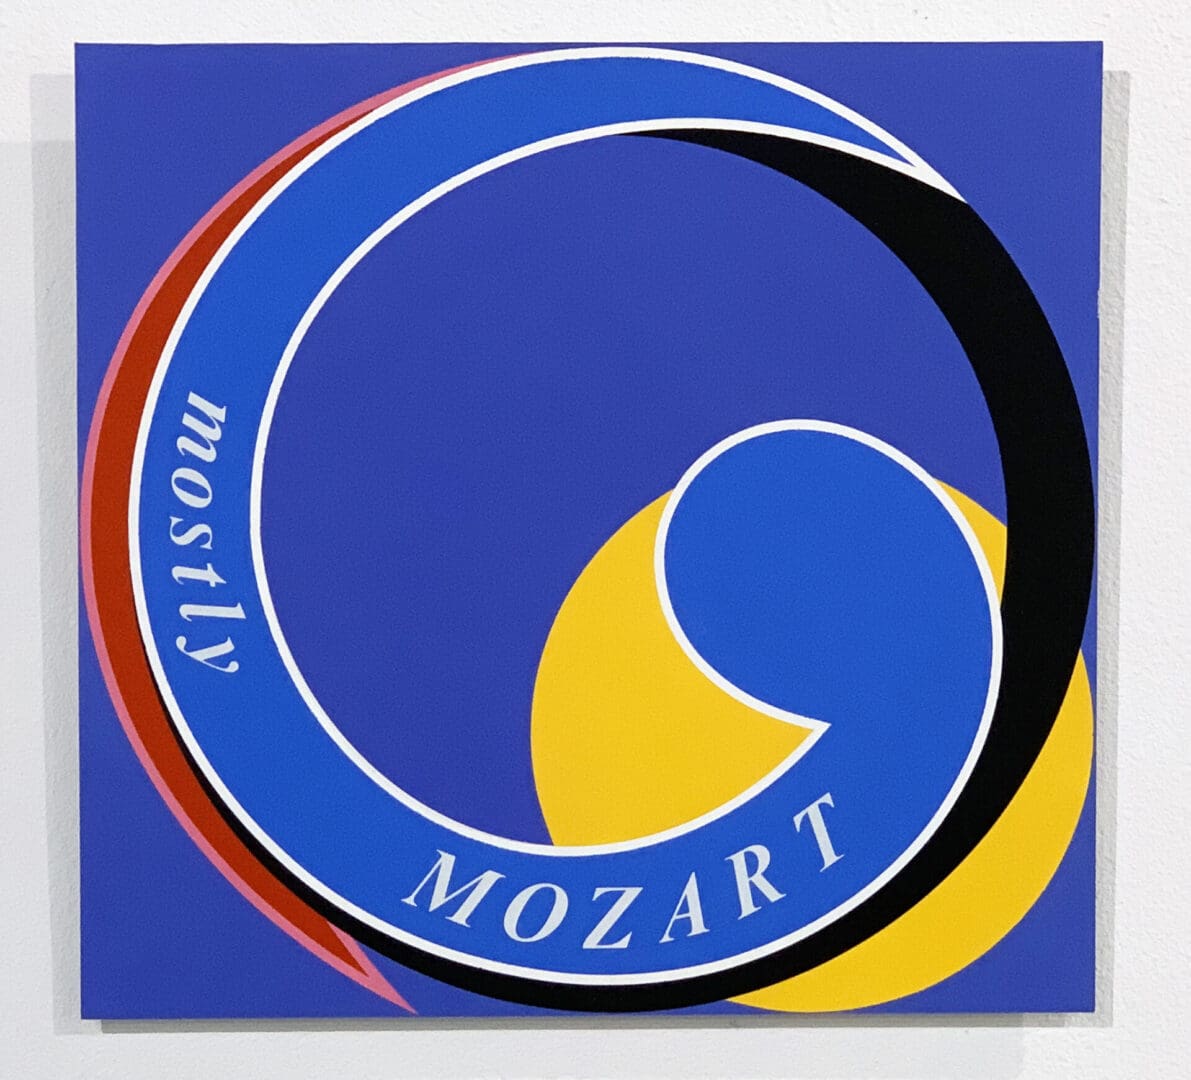 Clifford Singer. Mostly Mozart. Study for Lincoln Center. 1990. Acrylic on Plexiglas.  24 x 25 inches